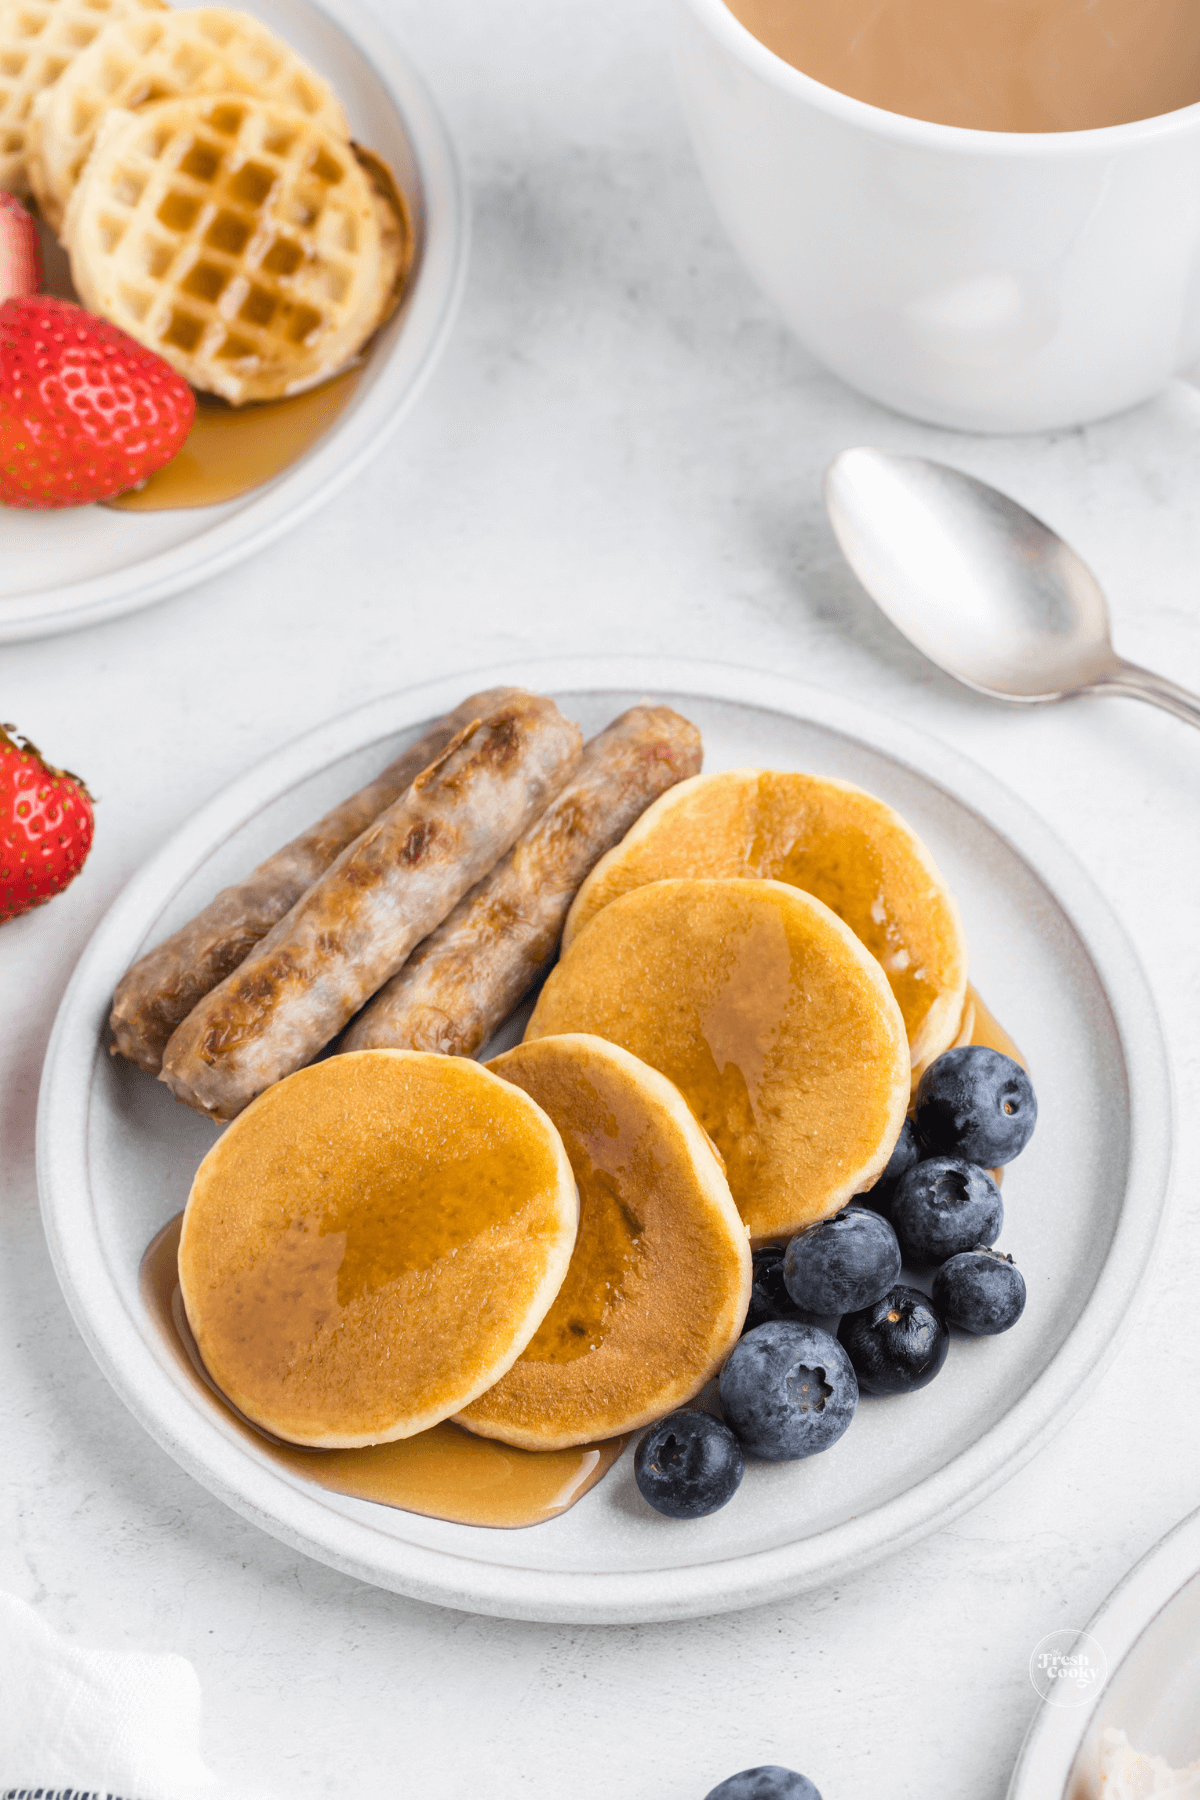 Pancakes and waffles with sausage and berries on a plate, from breakfast charcuterie board.